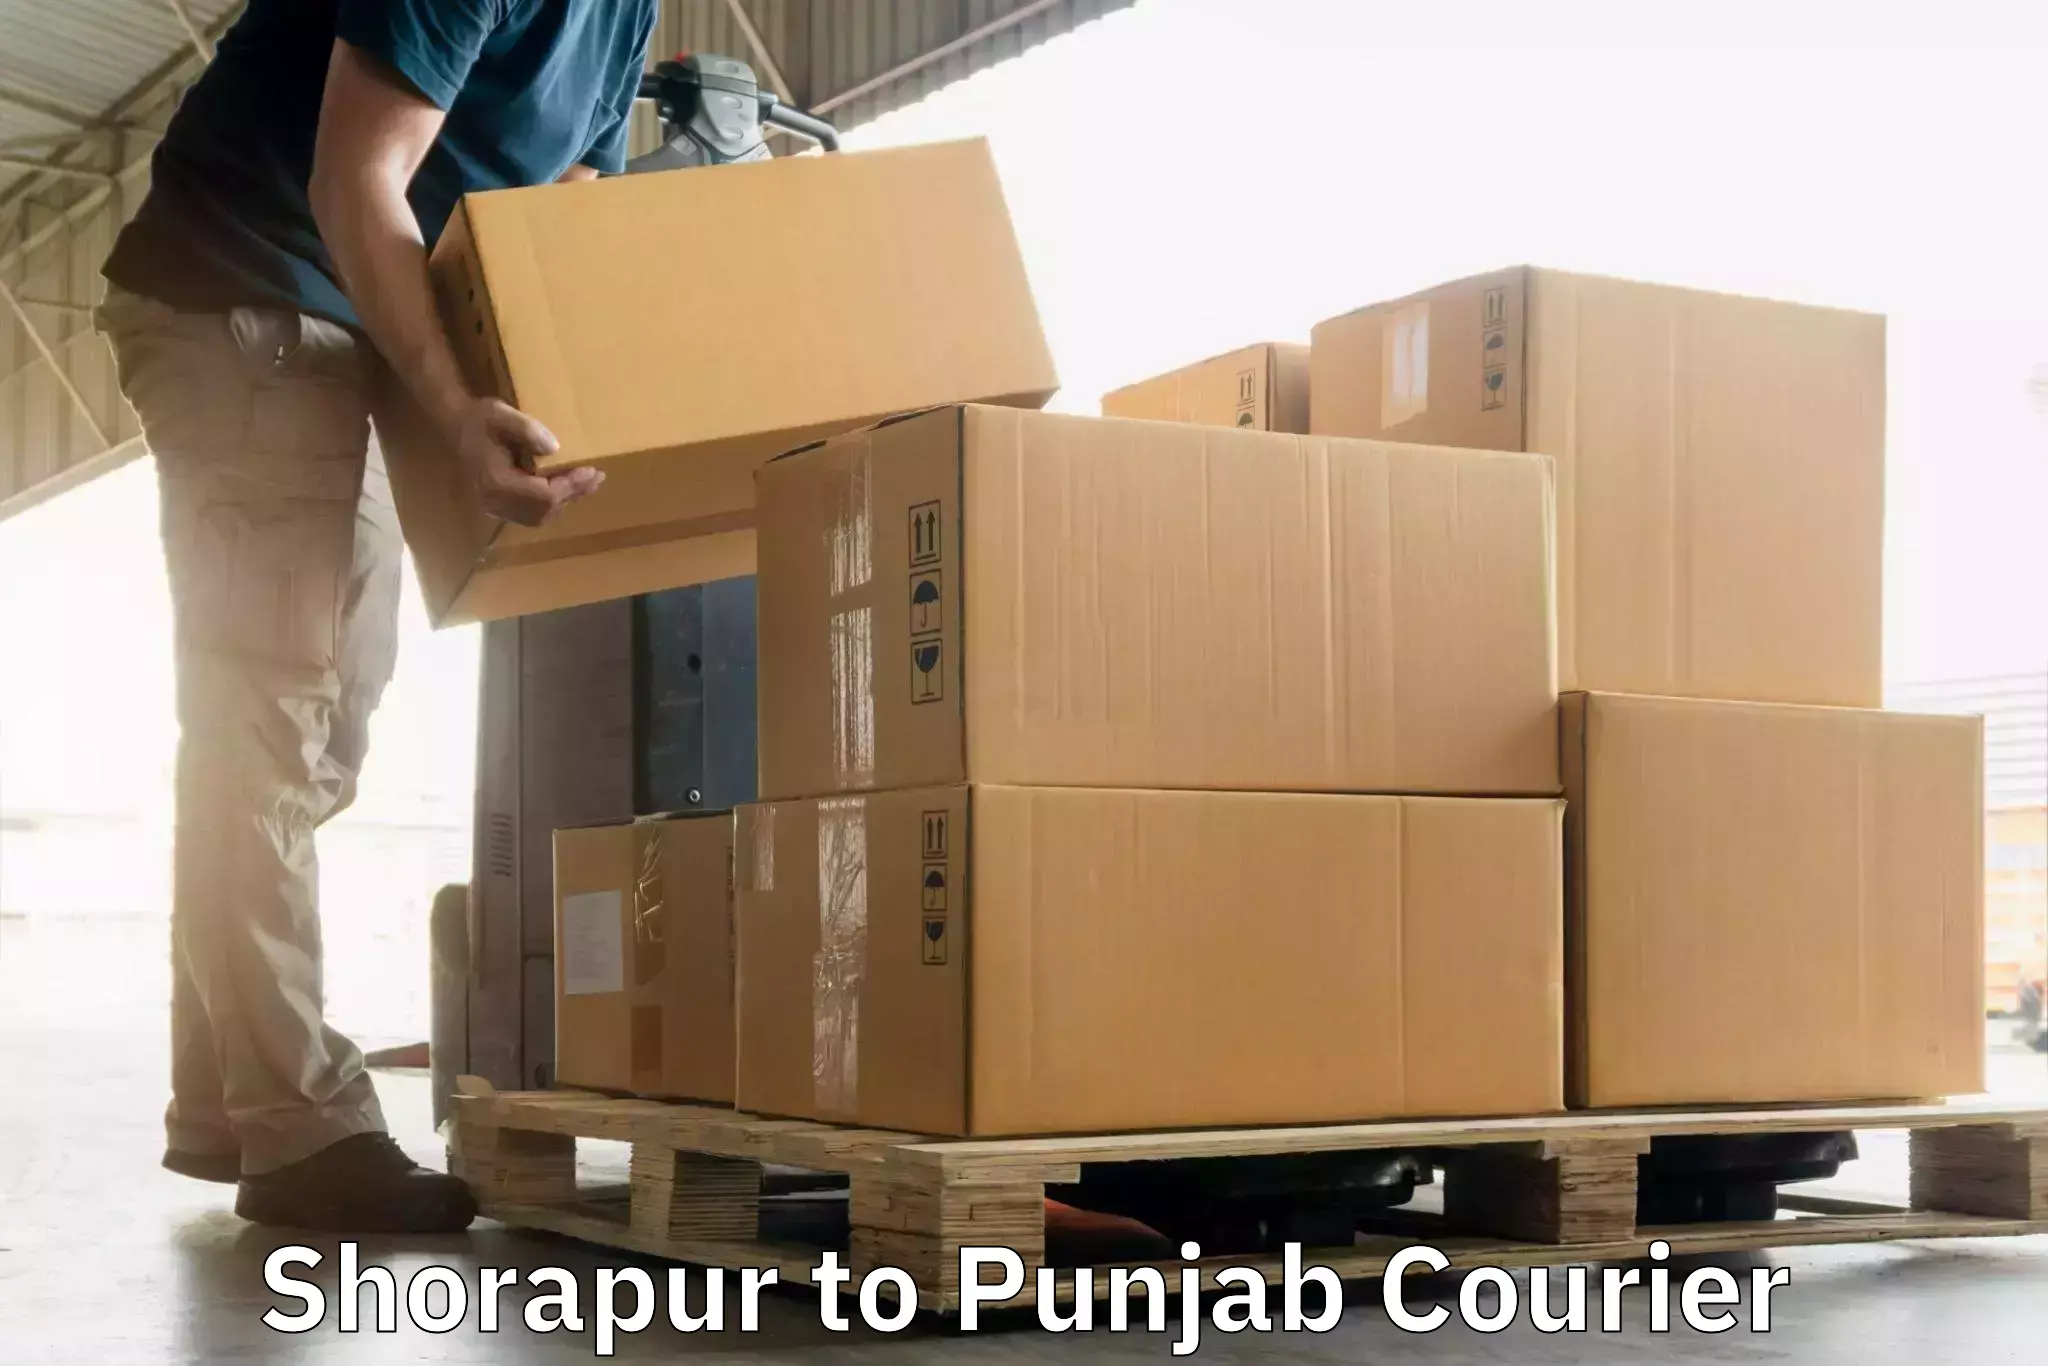 Sustainable courier practices Shorapur to Punjab